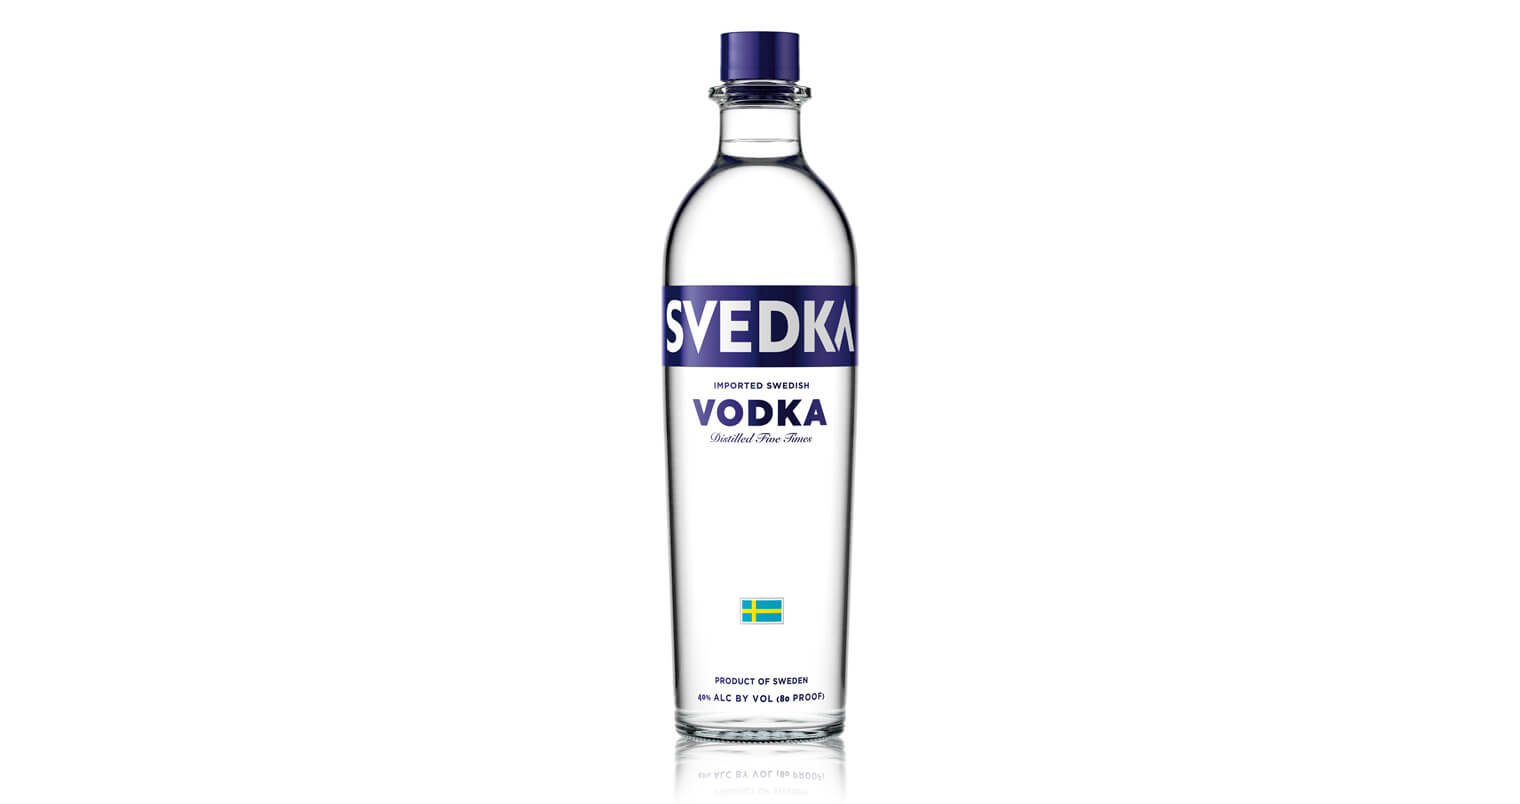 SVEDKA Takes Title of Top Imported Vodka in the U.S., industry news, featured image